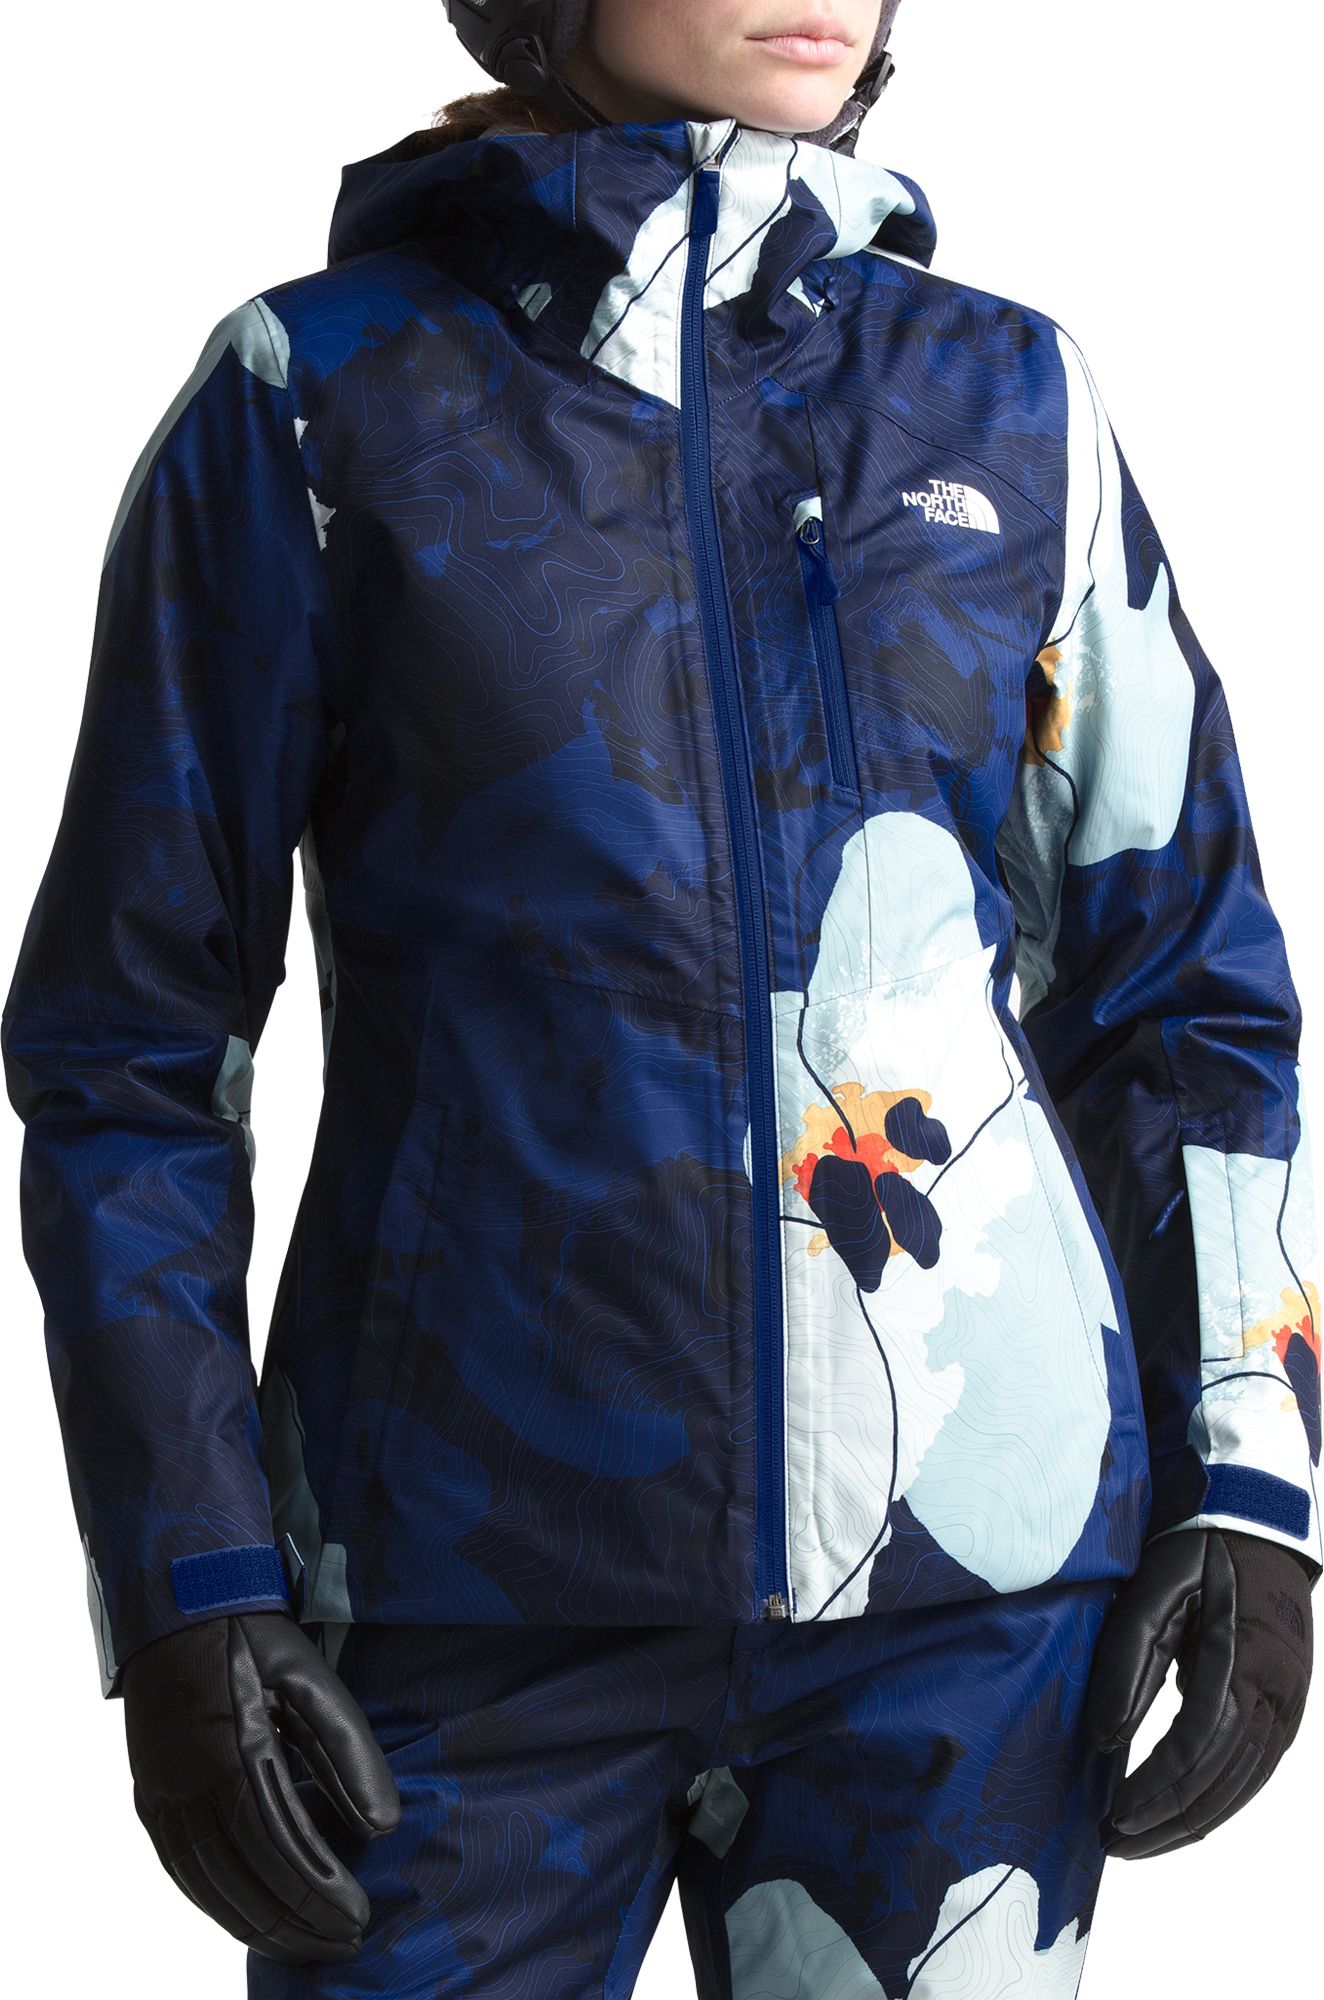 womens selsley triclimate jacket